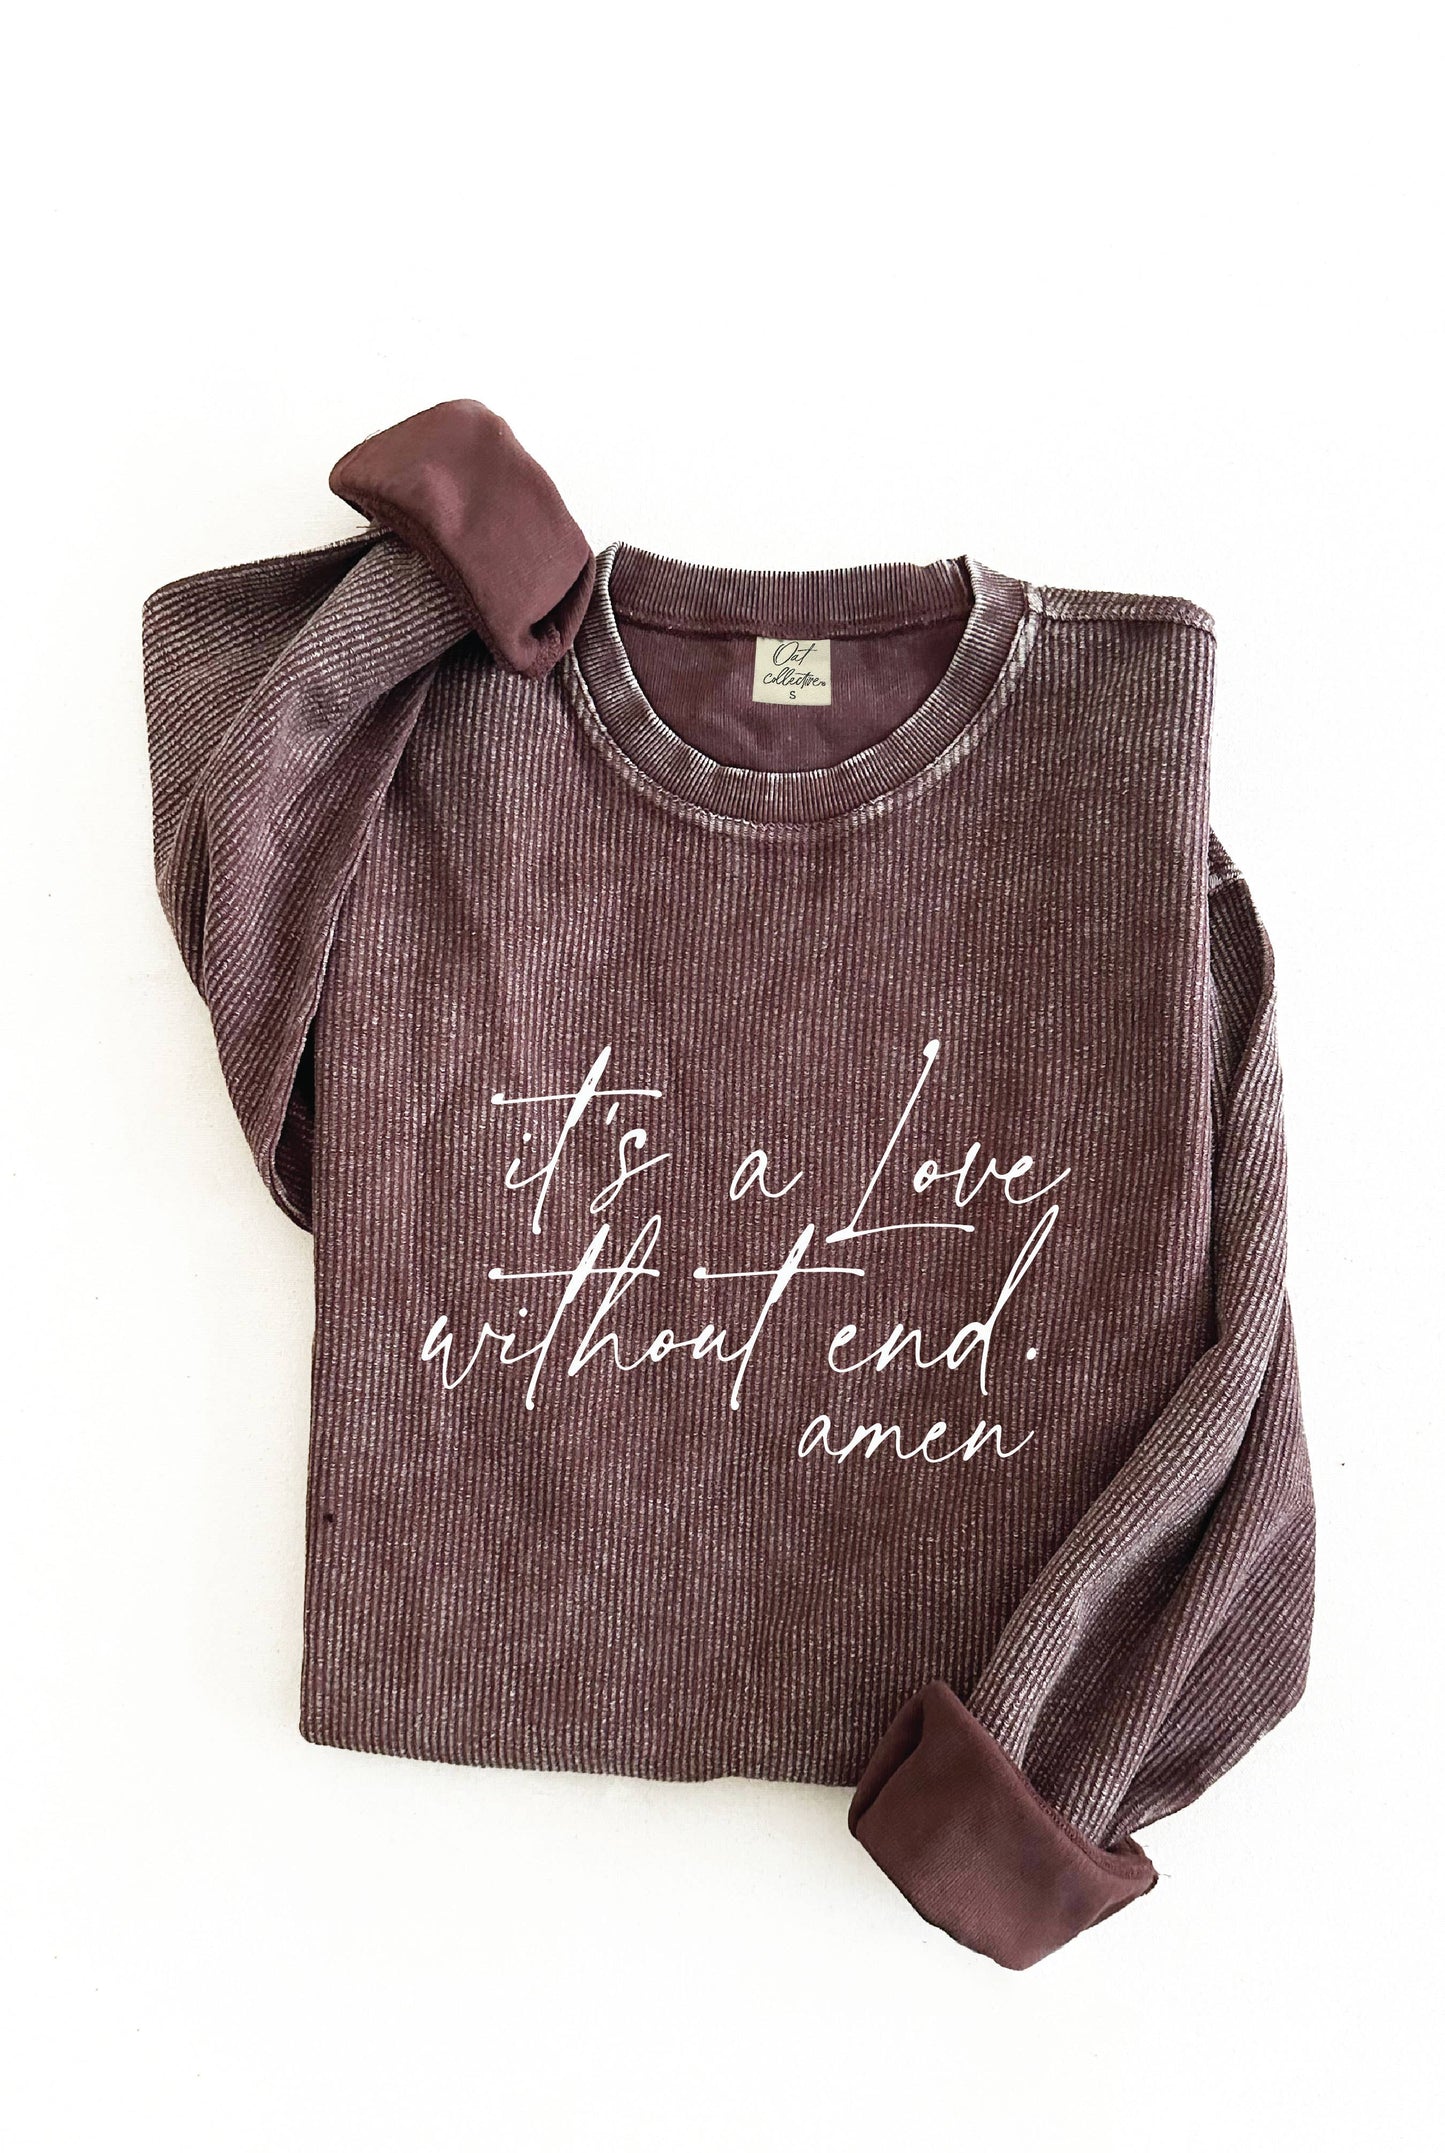 IT'S A LOVE WITHOUT END. AMEN Thermal Vintage Pullover: S / VINTAGE CHARCOAL